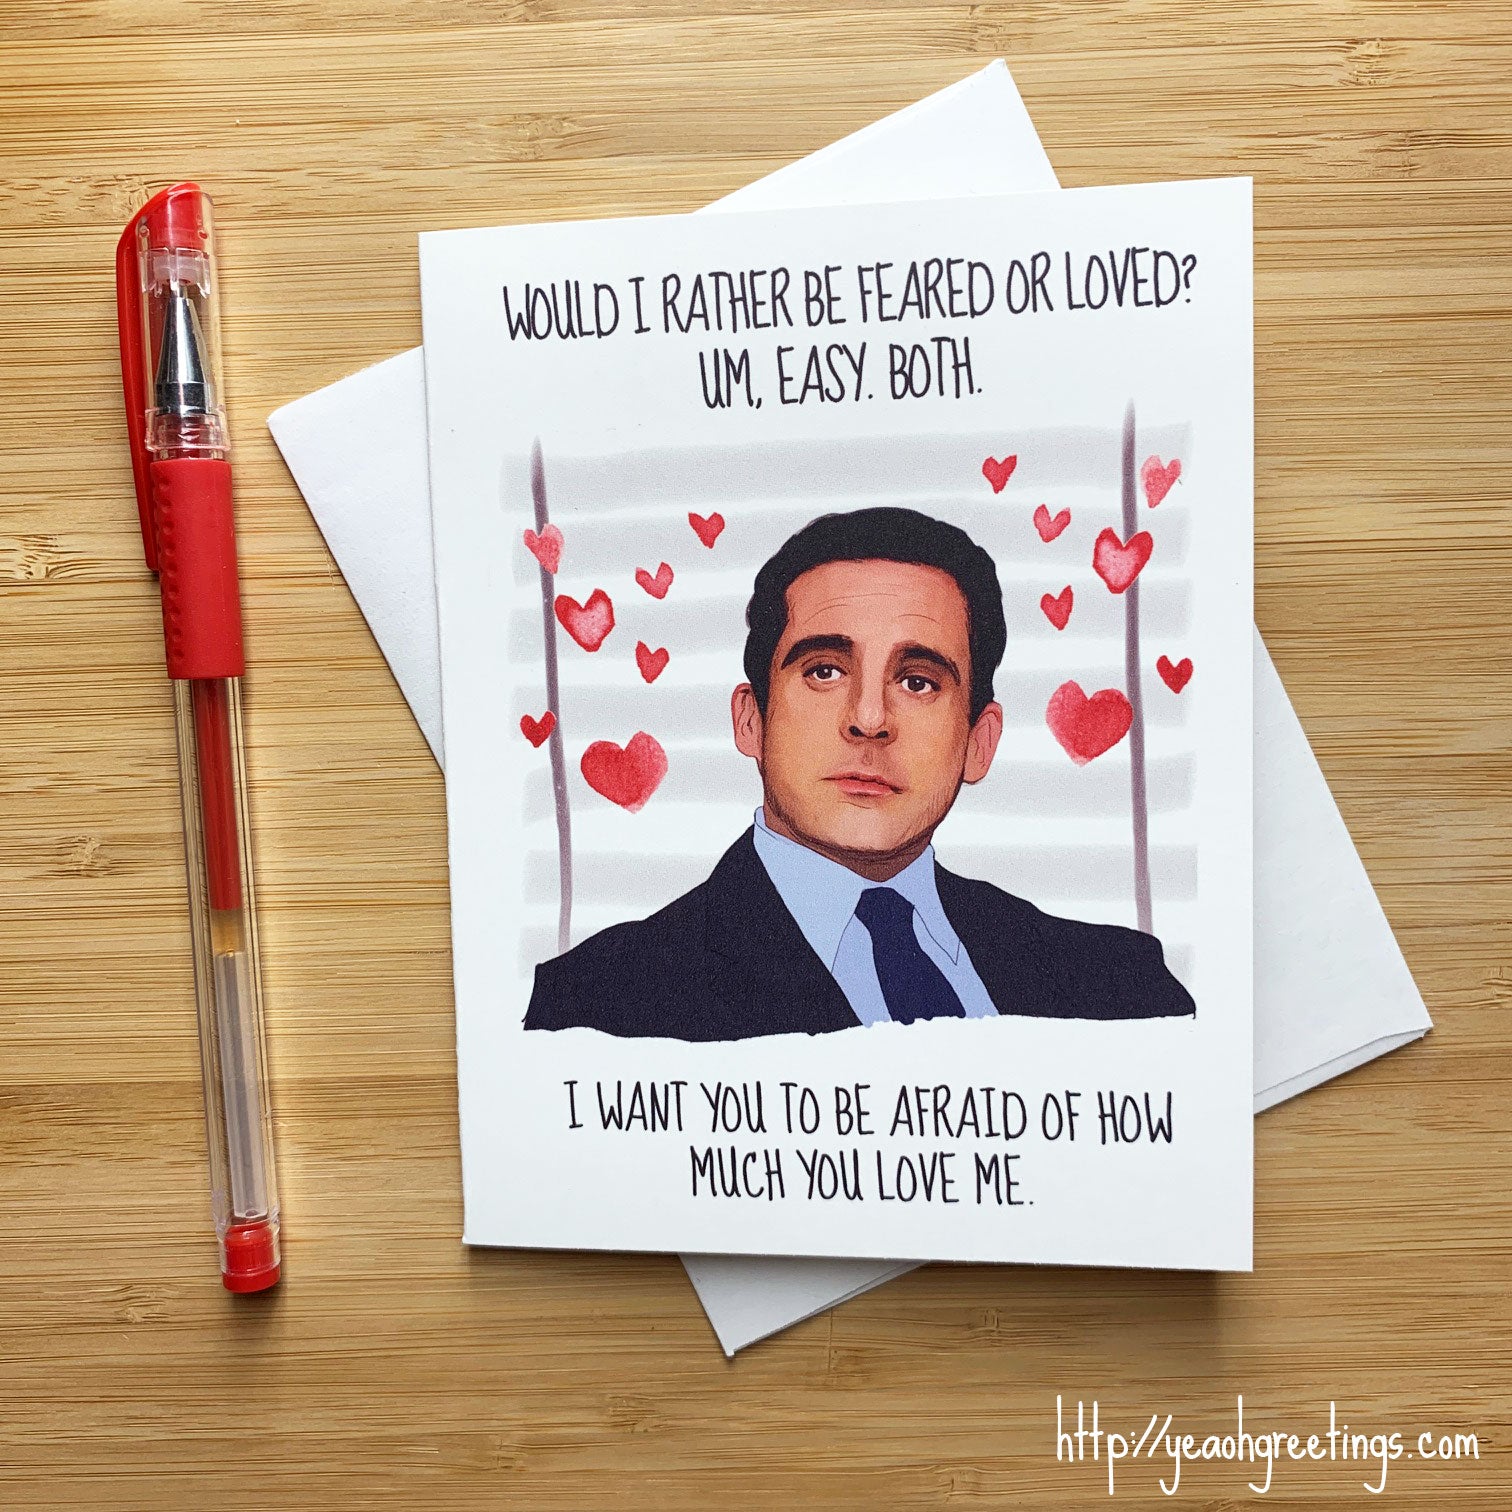 Meme Valentines Day Cards For Friends These valentine's day memes are